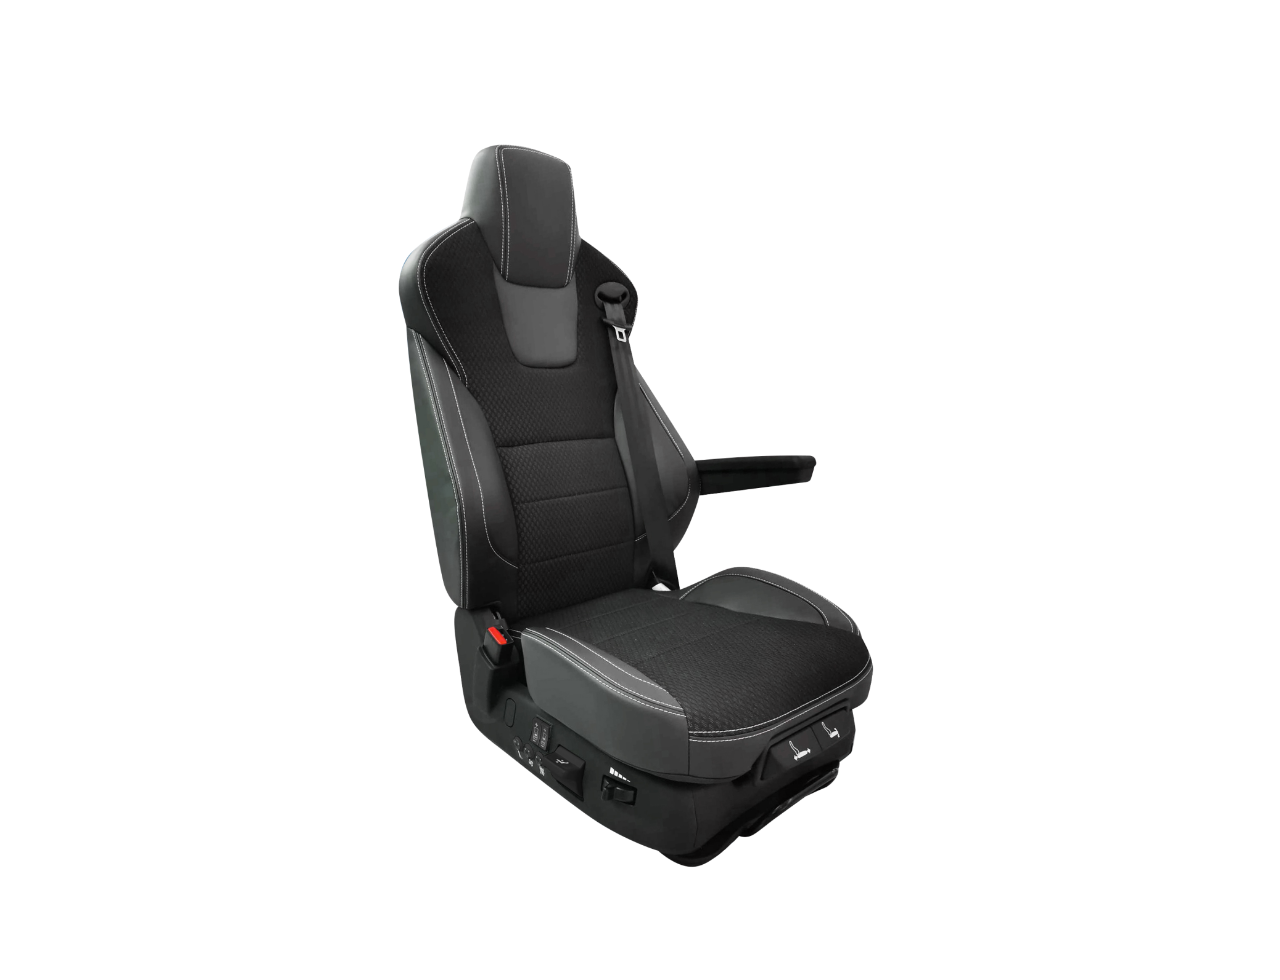 YTSQ01(E) Full-air Suspended Driver Seat